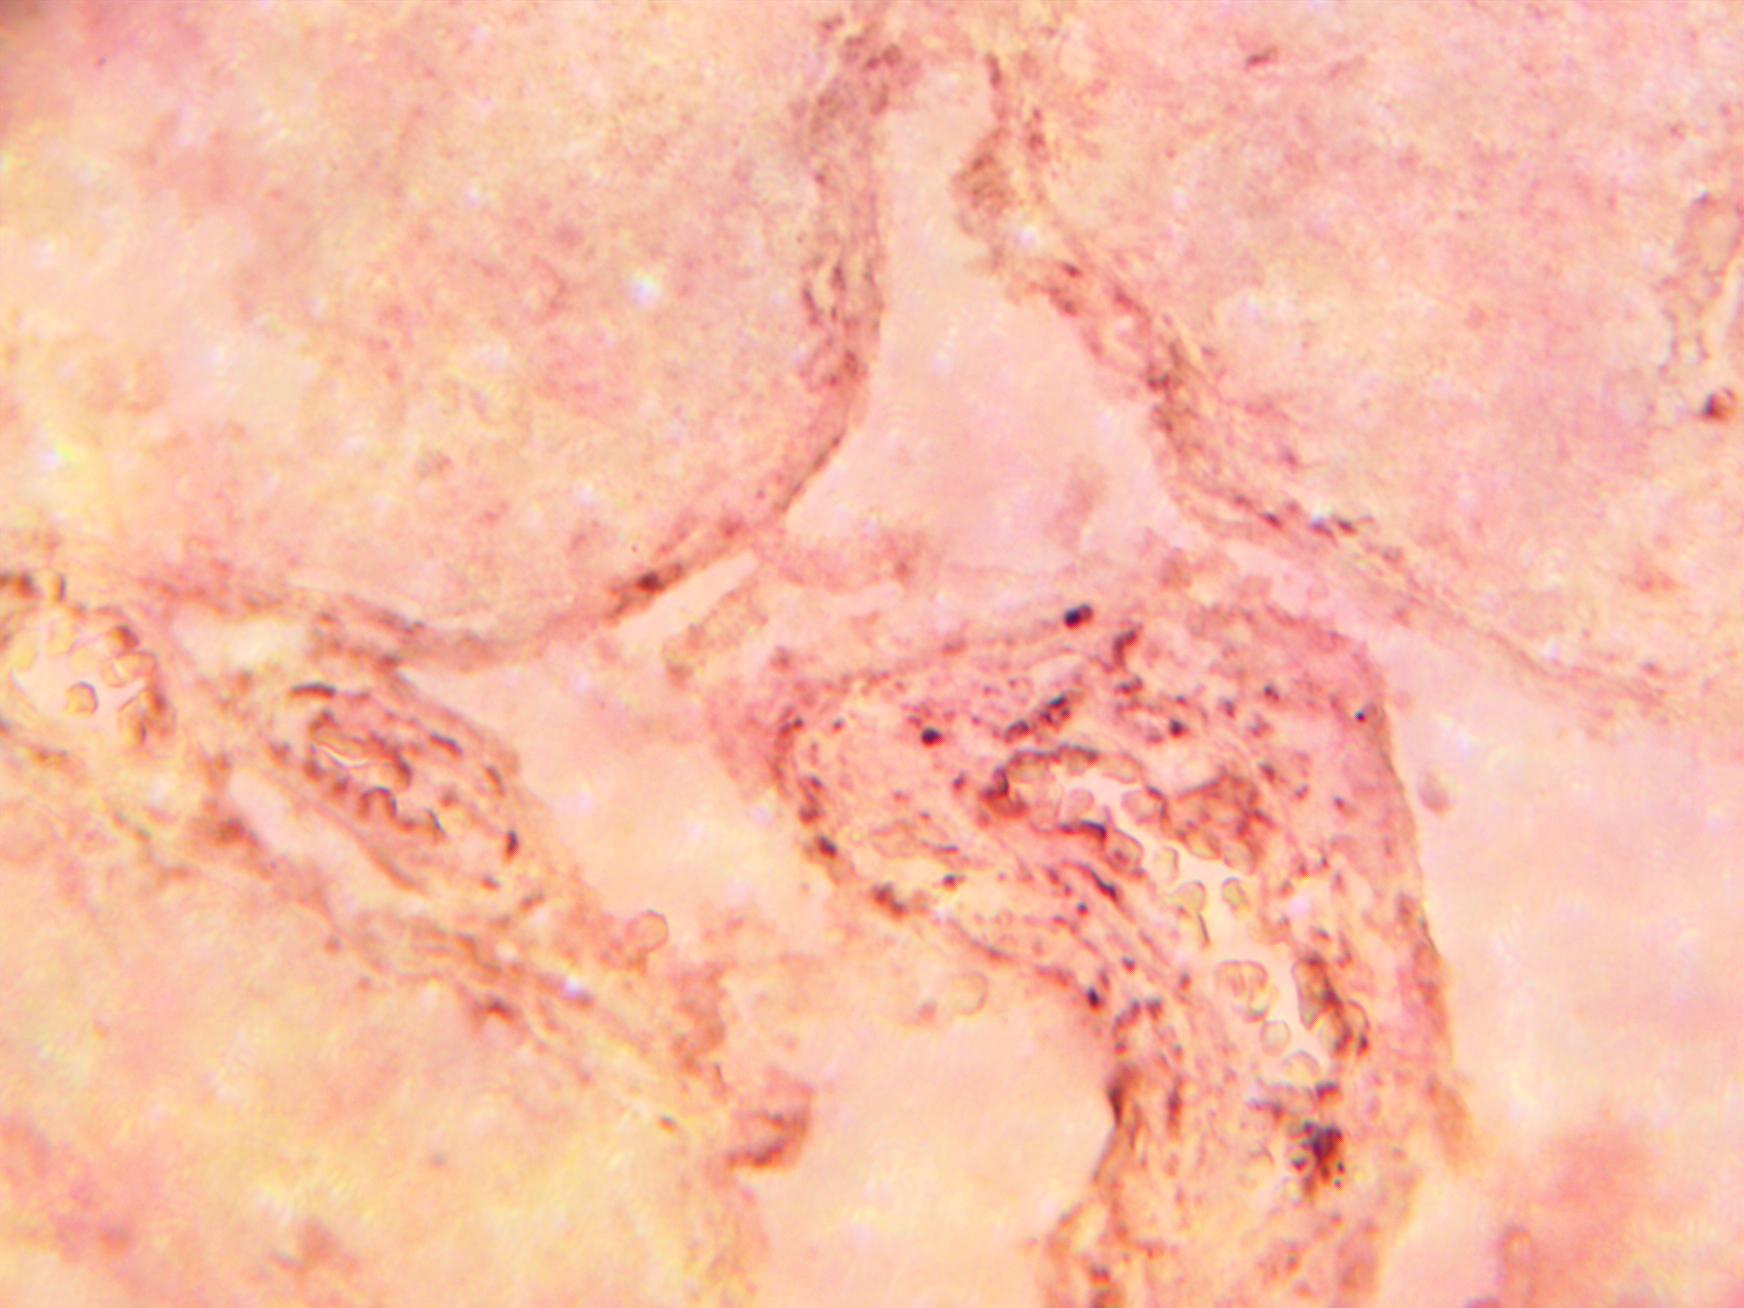 Immunohistochemical staining of normal human testis tissue using MGMT antibody (Cat. No. X2730P) at 10 µg/ml and detected using anti-Rabbit HRP secondary antibody and visualized using DAB substrate and hematoxylin counterstain.